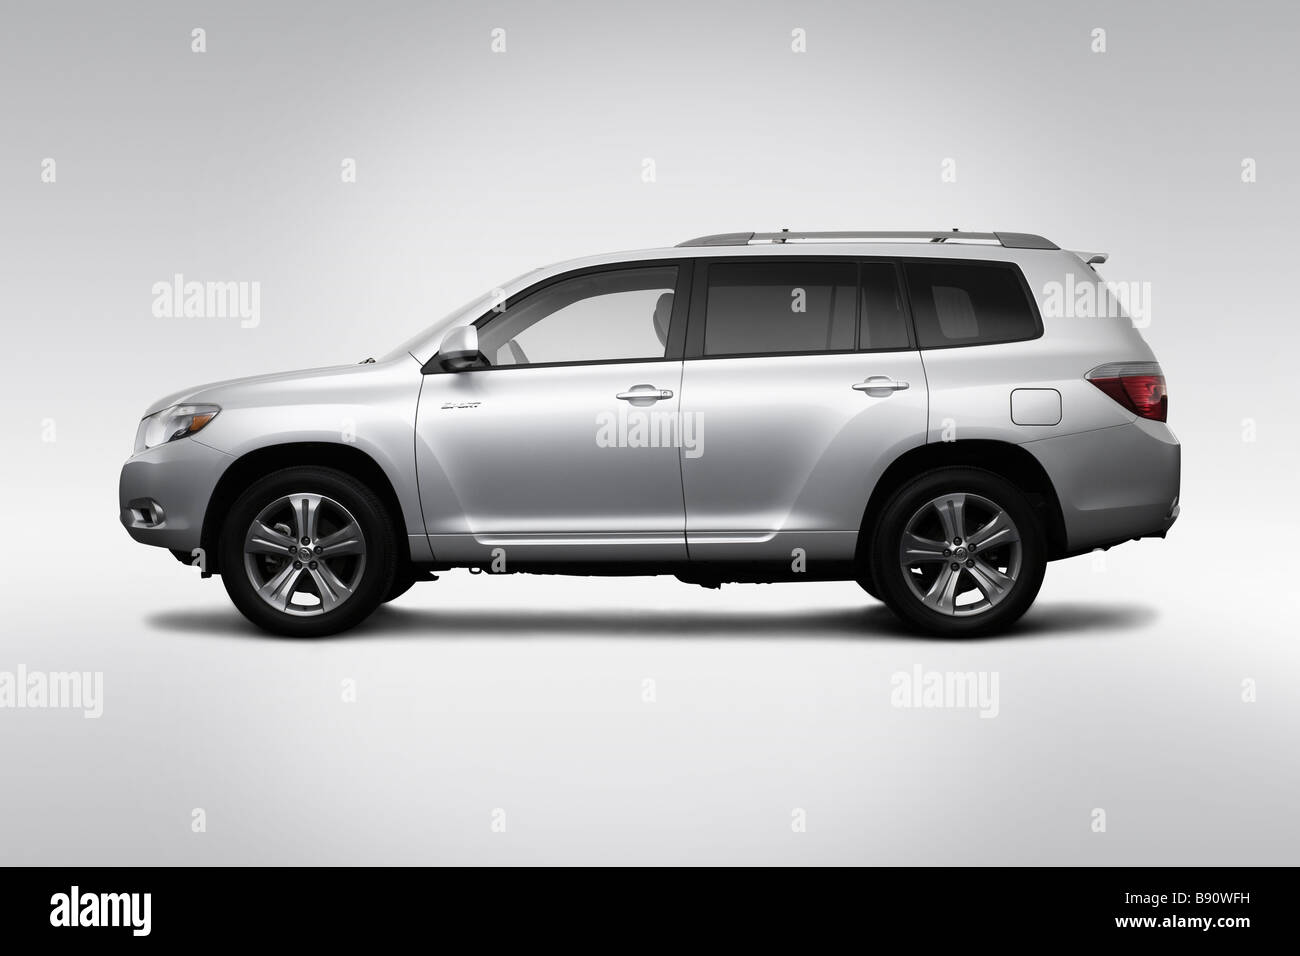 2009 Toyota Highlander Sport In Silver Drivers Side Profile Stock Photo Alamy